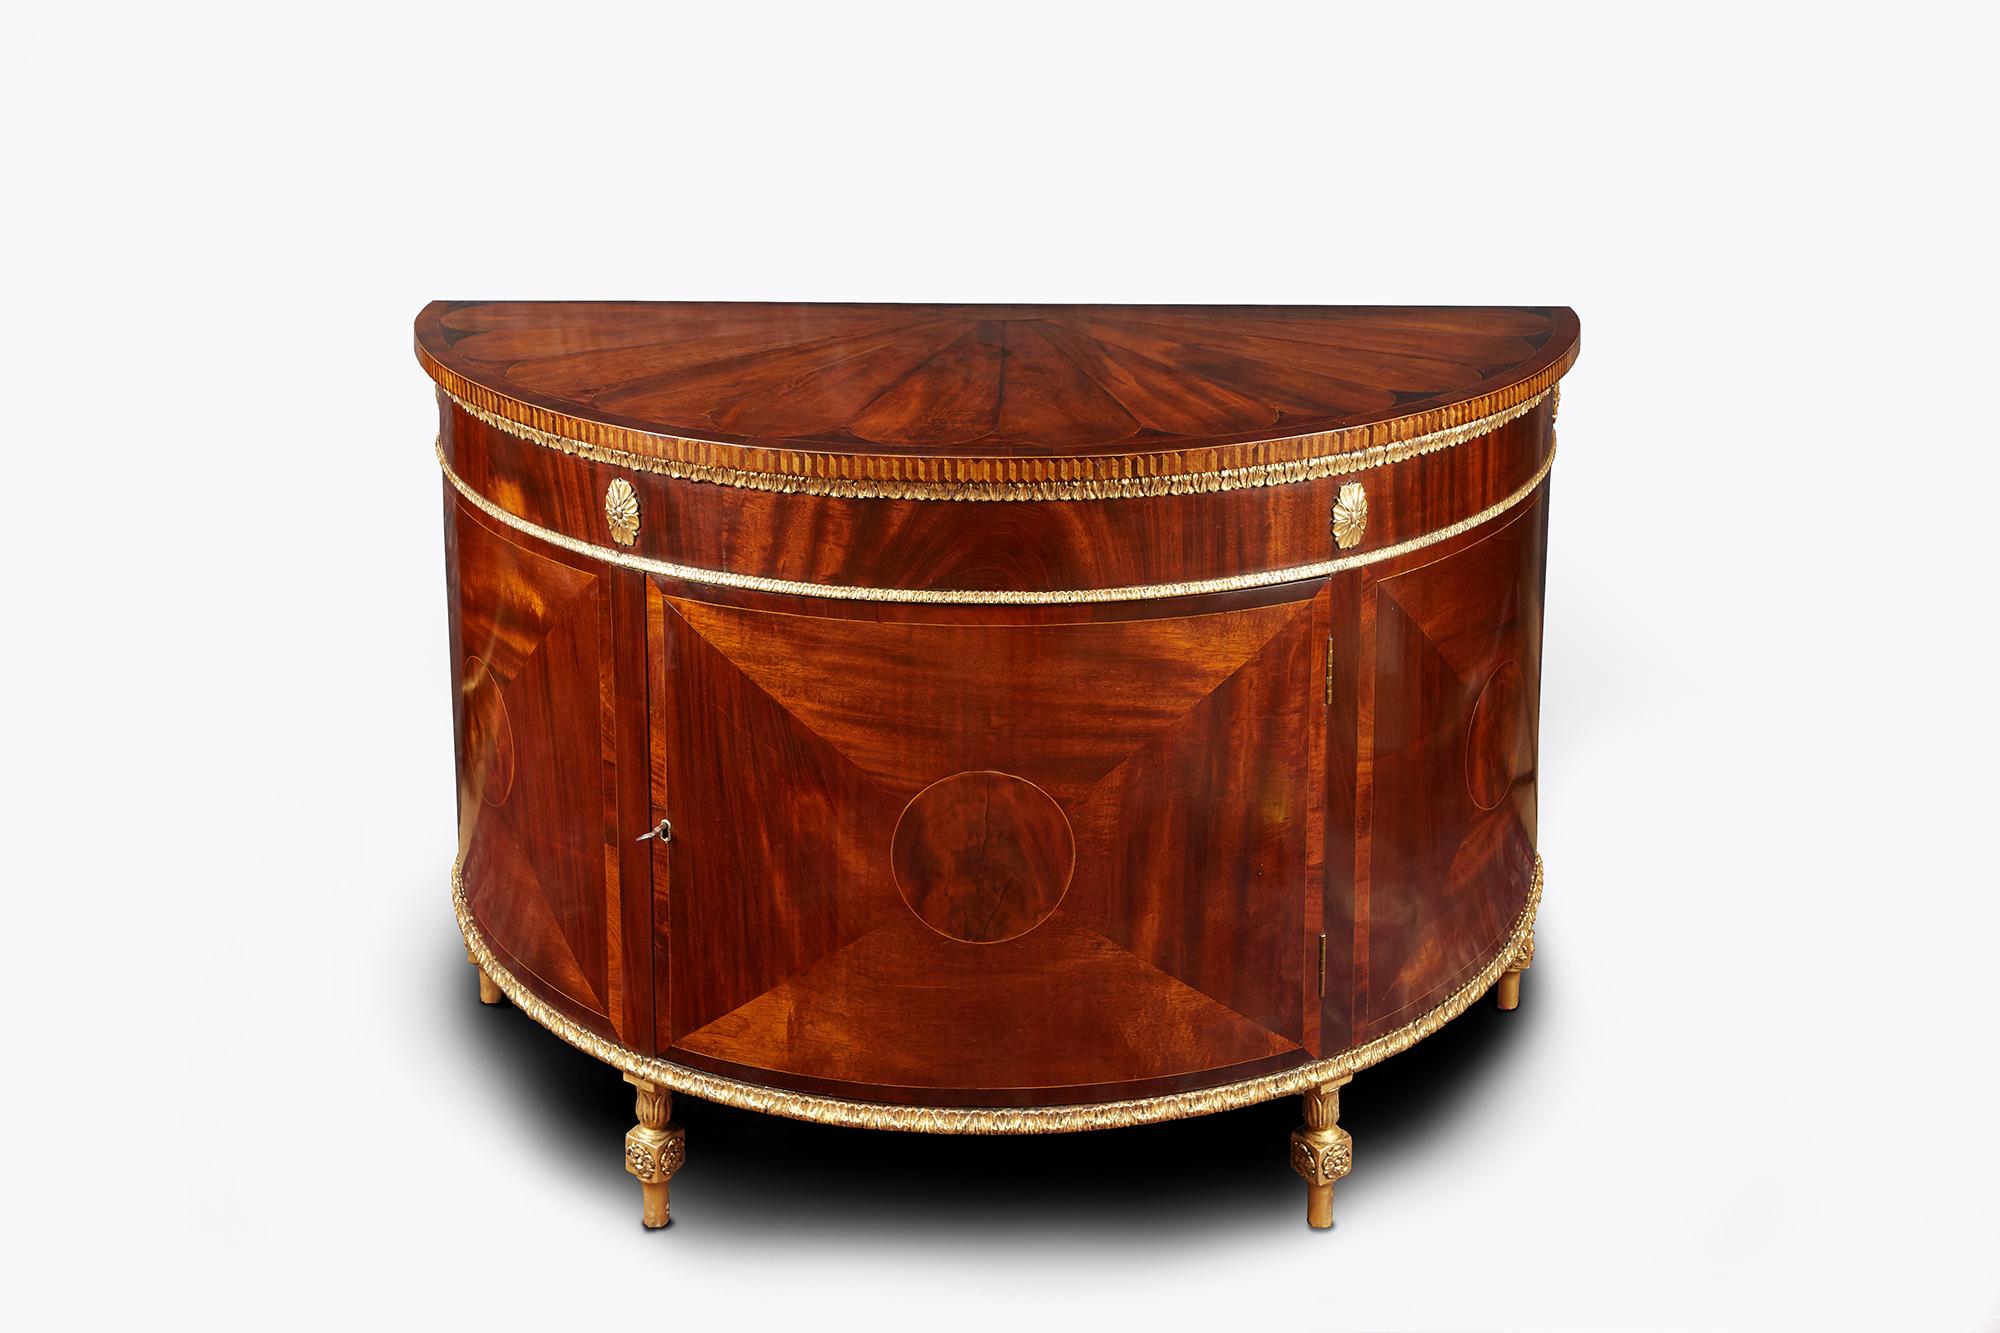 Late 18th century George III pair of flame mahogany demilune commodes, the moulded top with foliate shaped fan inlaid with boxwood and fruitwood and crossbanded in rosewood, trimmed with parquetry rim raised over parcel gilt frieze with egg and dart